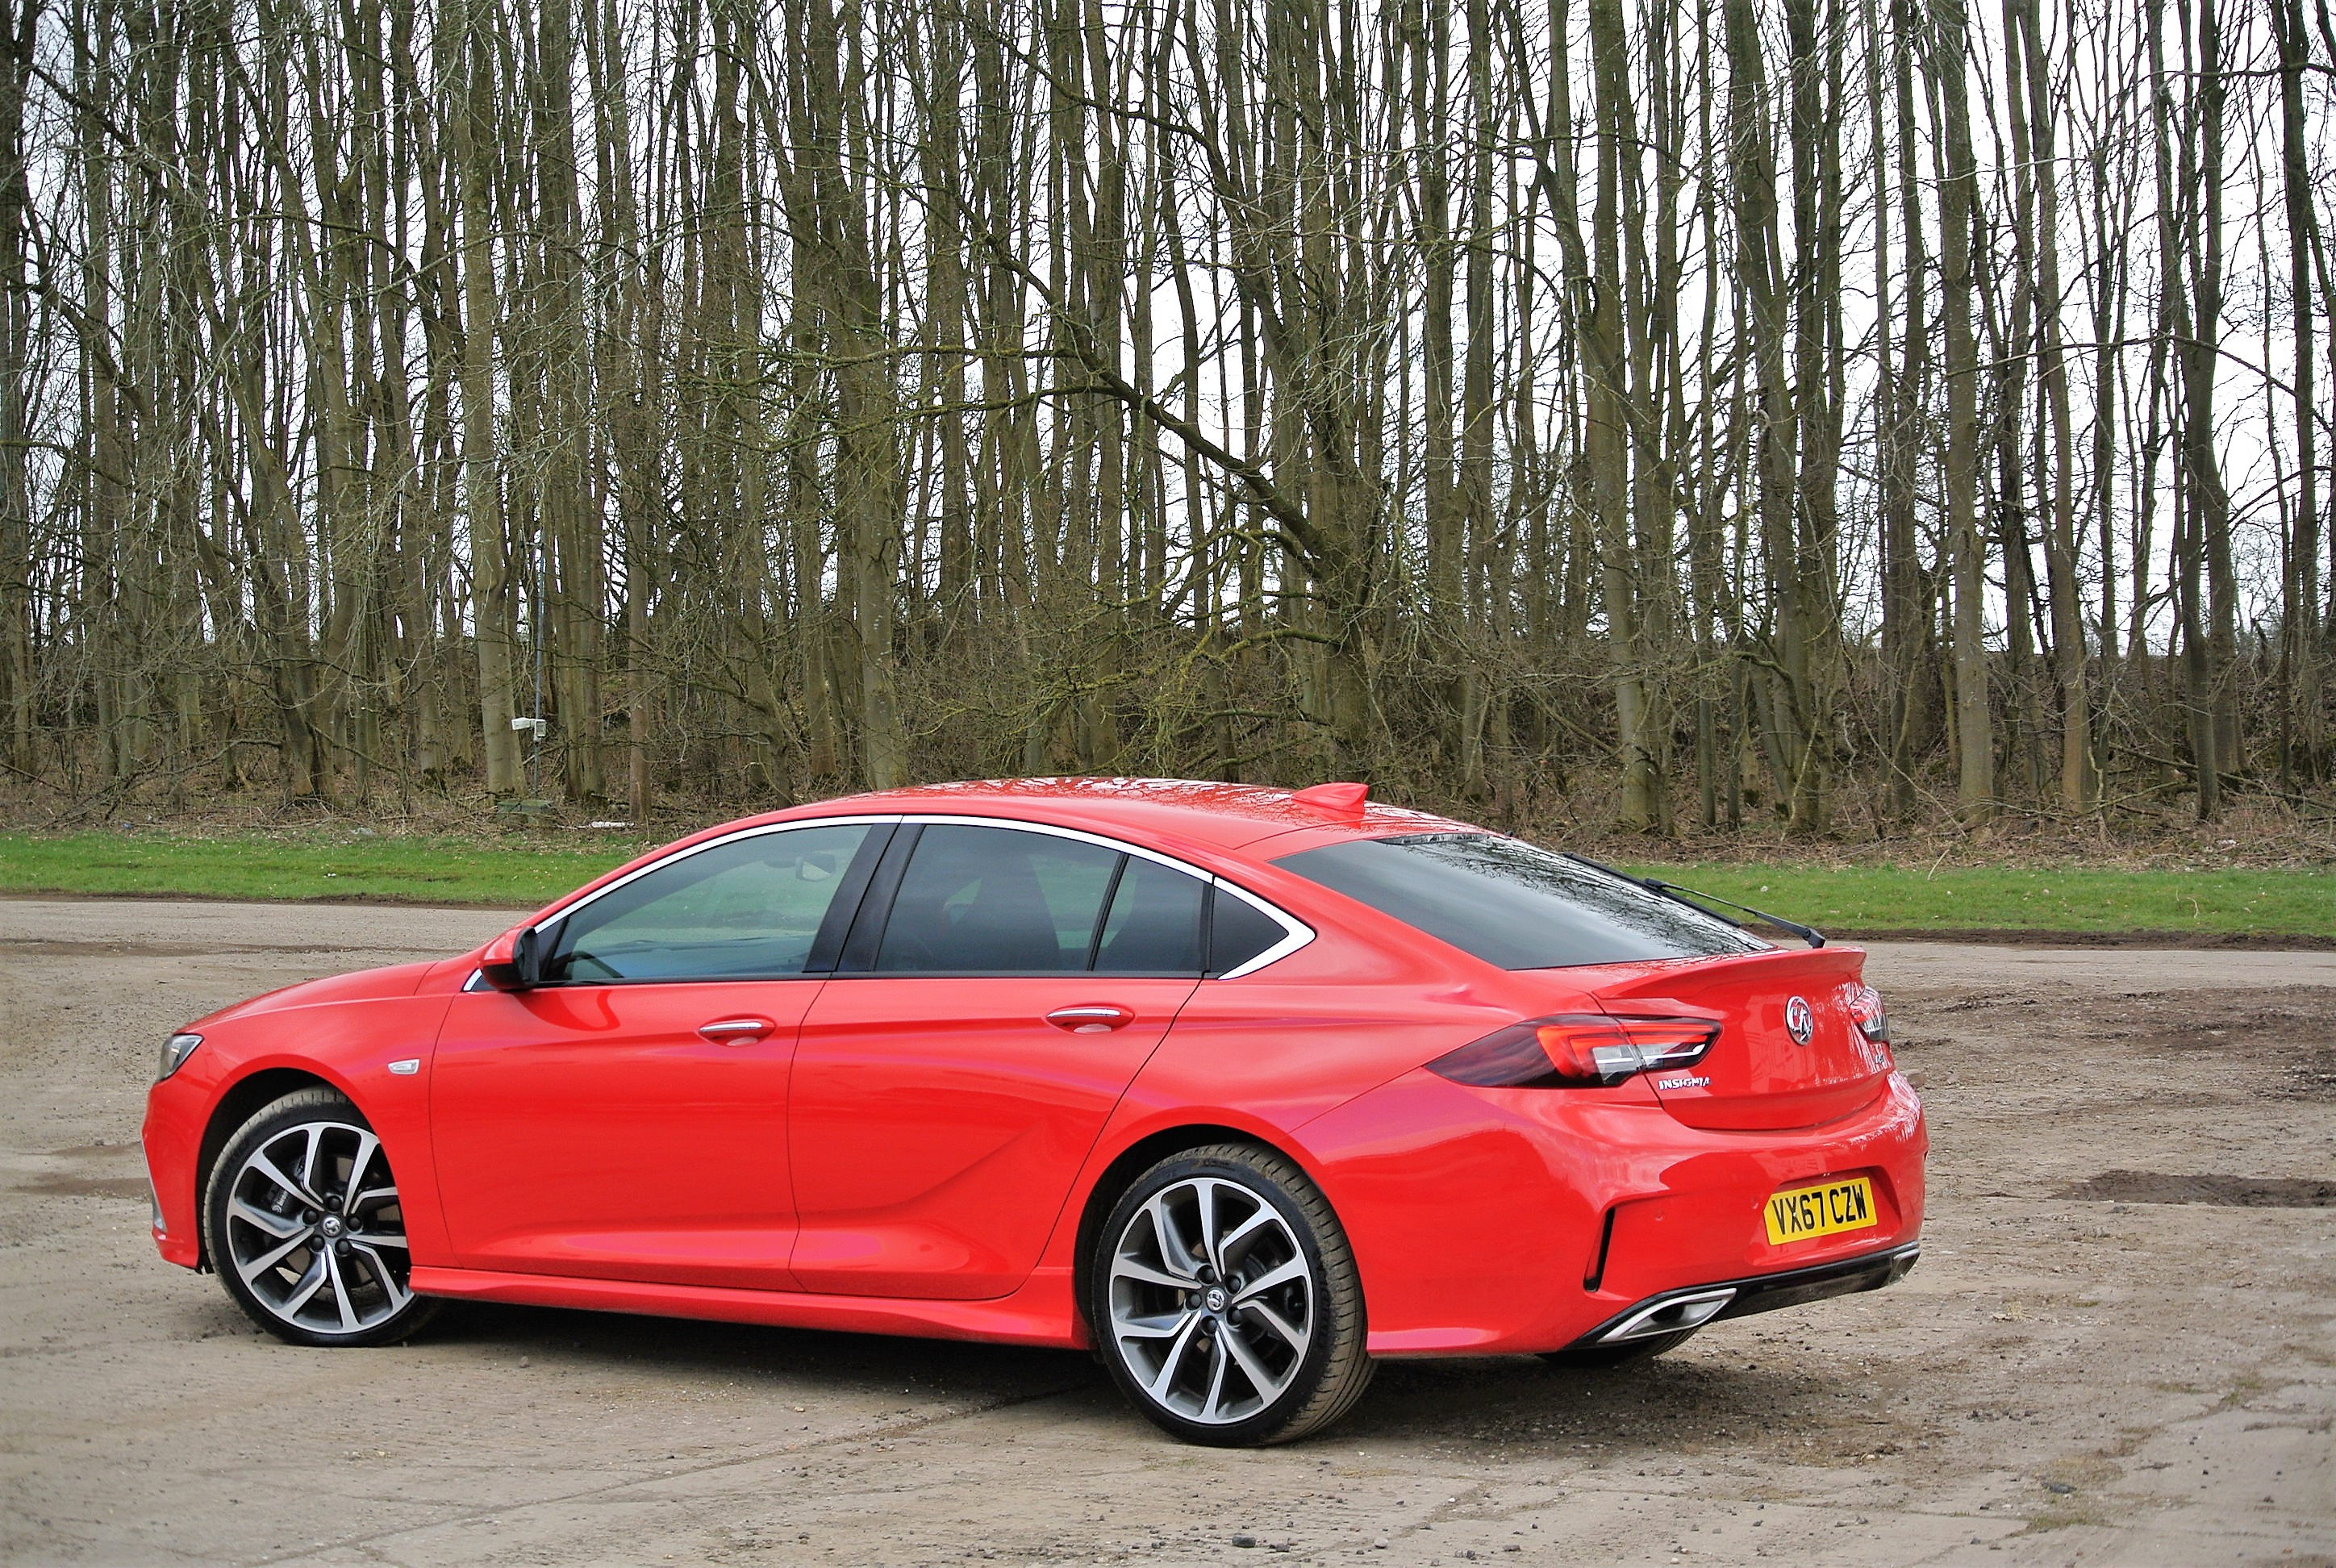 Judiciously re-engineered Insignia gifts Vauxhall a sporting GSi remit